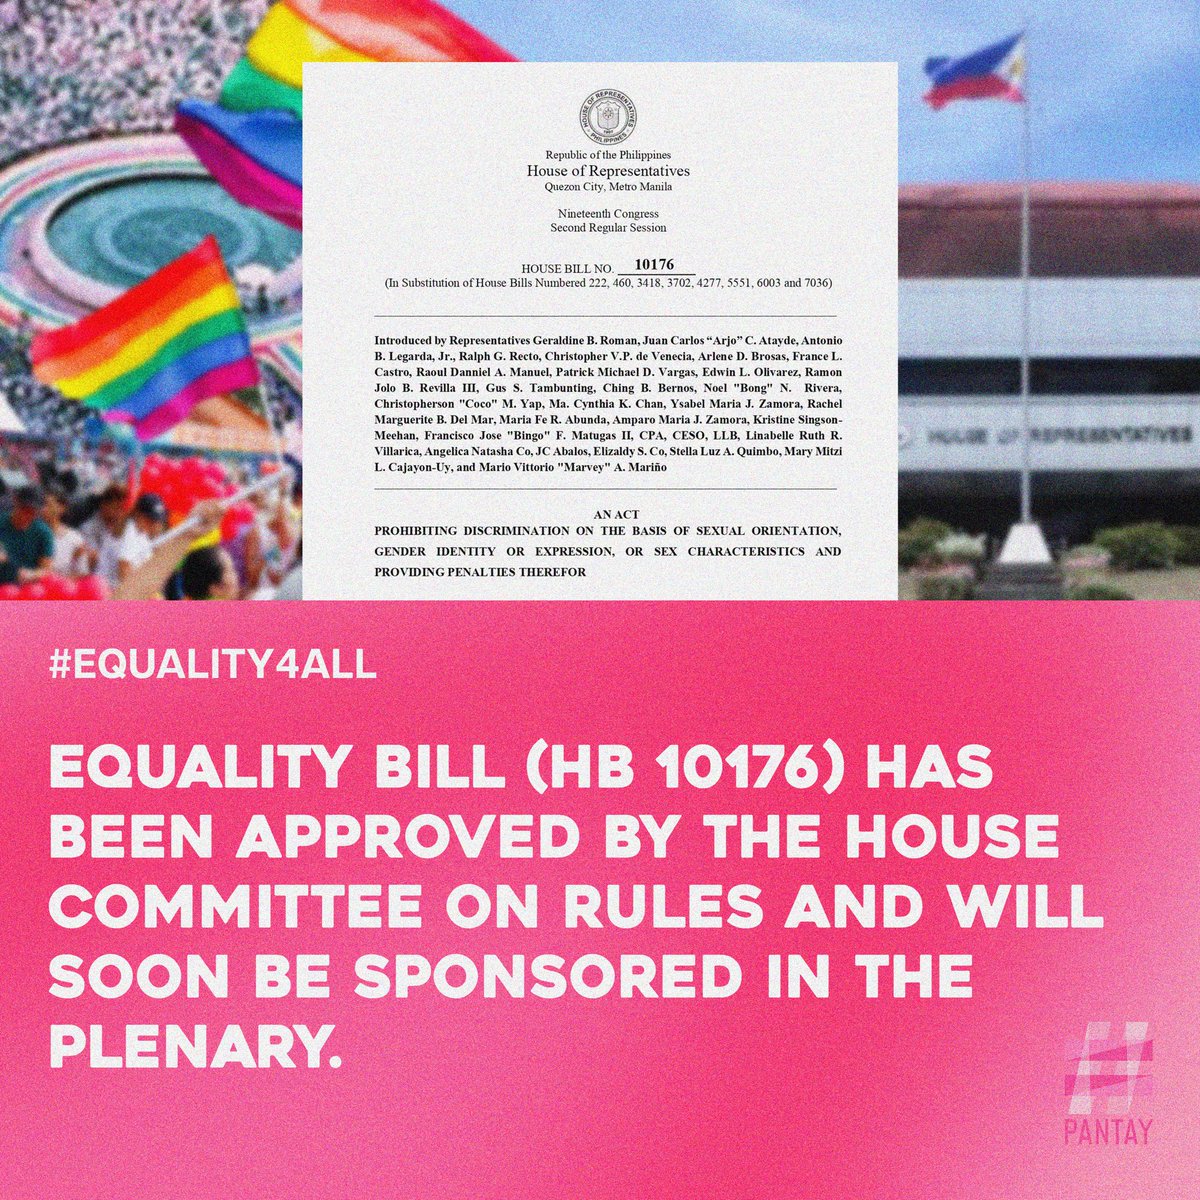 One step closer toward equality! 🌈 After its approval by the House Committee on Rules, the Equality Bill (HB 10176) will soon go to the plenary for second reading. #Equality4All #PANTAYtayo #PANTAY